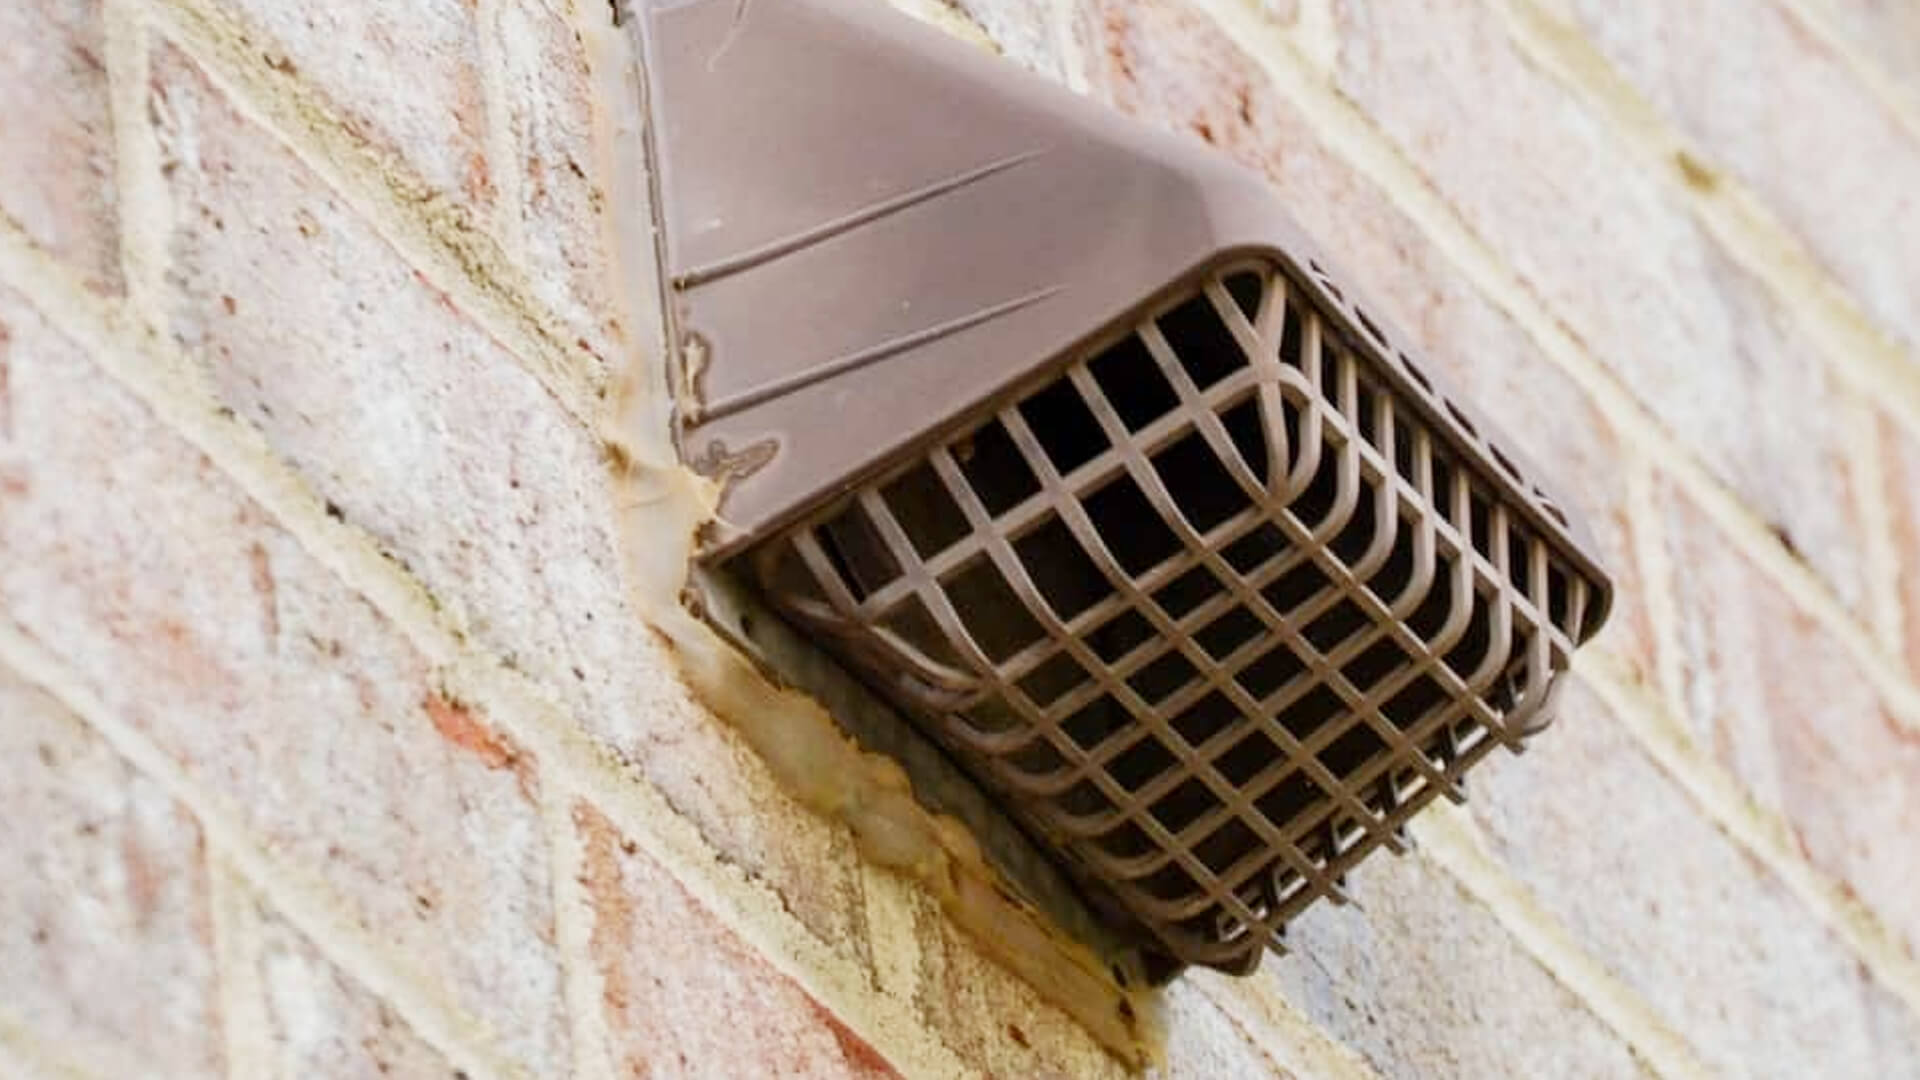 Dryer Vent Cleaning Company West Hollywood |  Six Sense Dryer Vent Cleaning